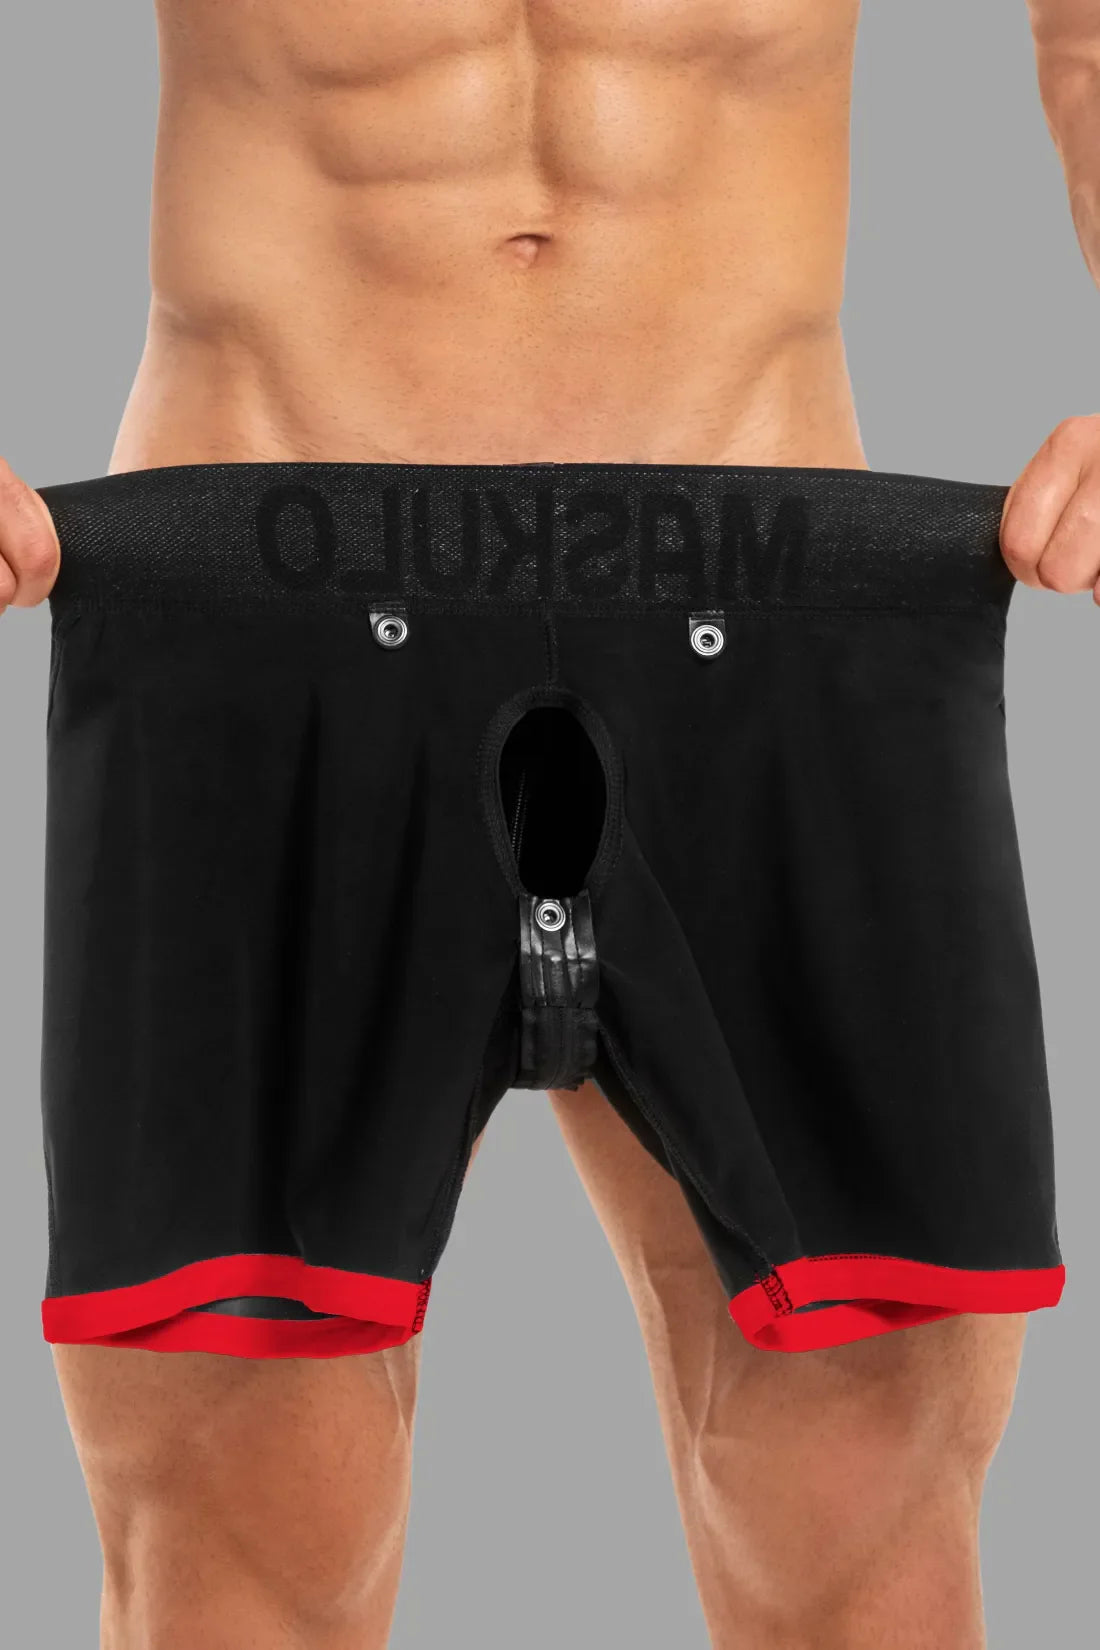 Basic Shorts with Pads. Zippered rear. Black and Red